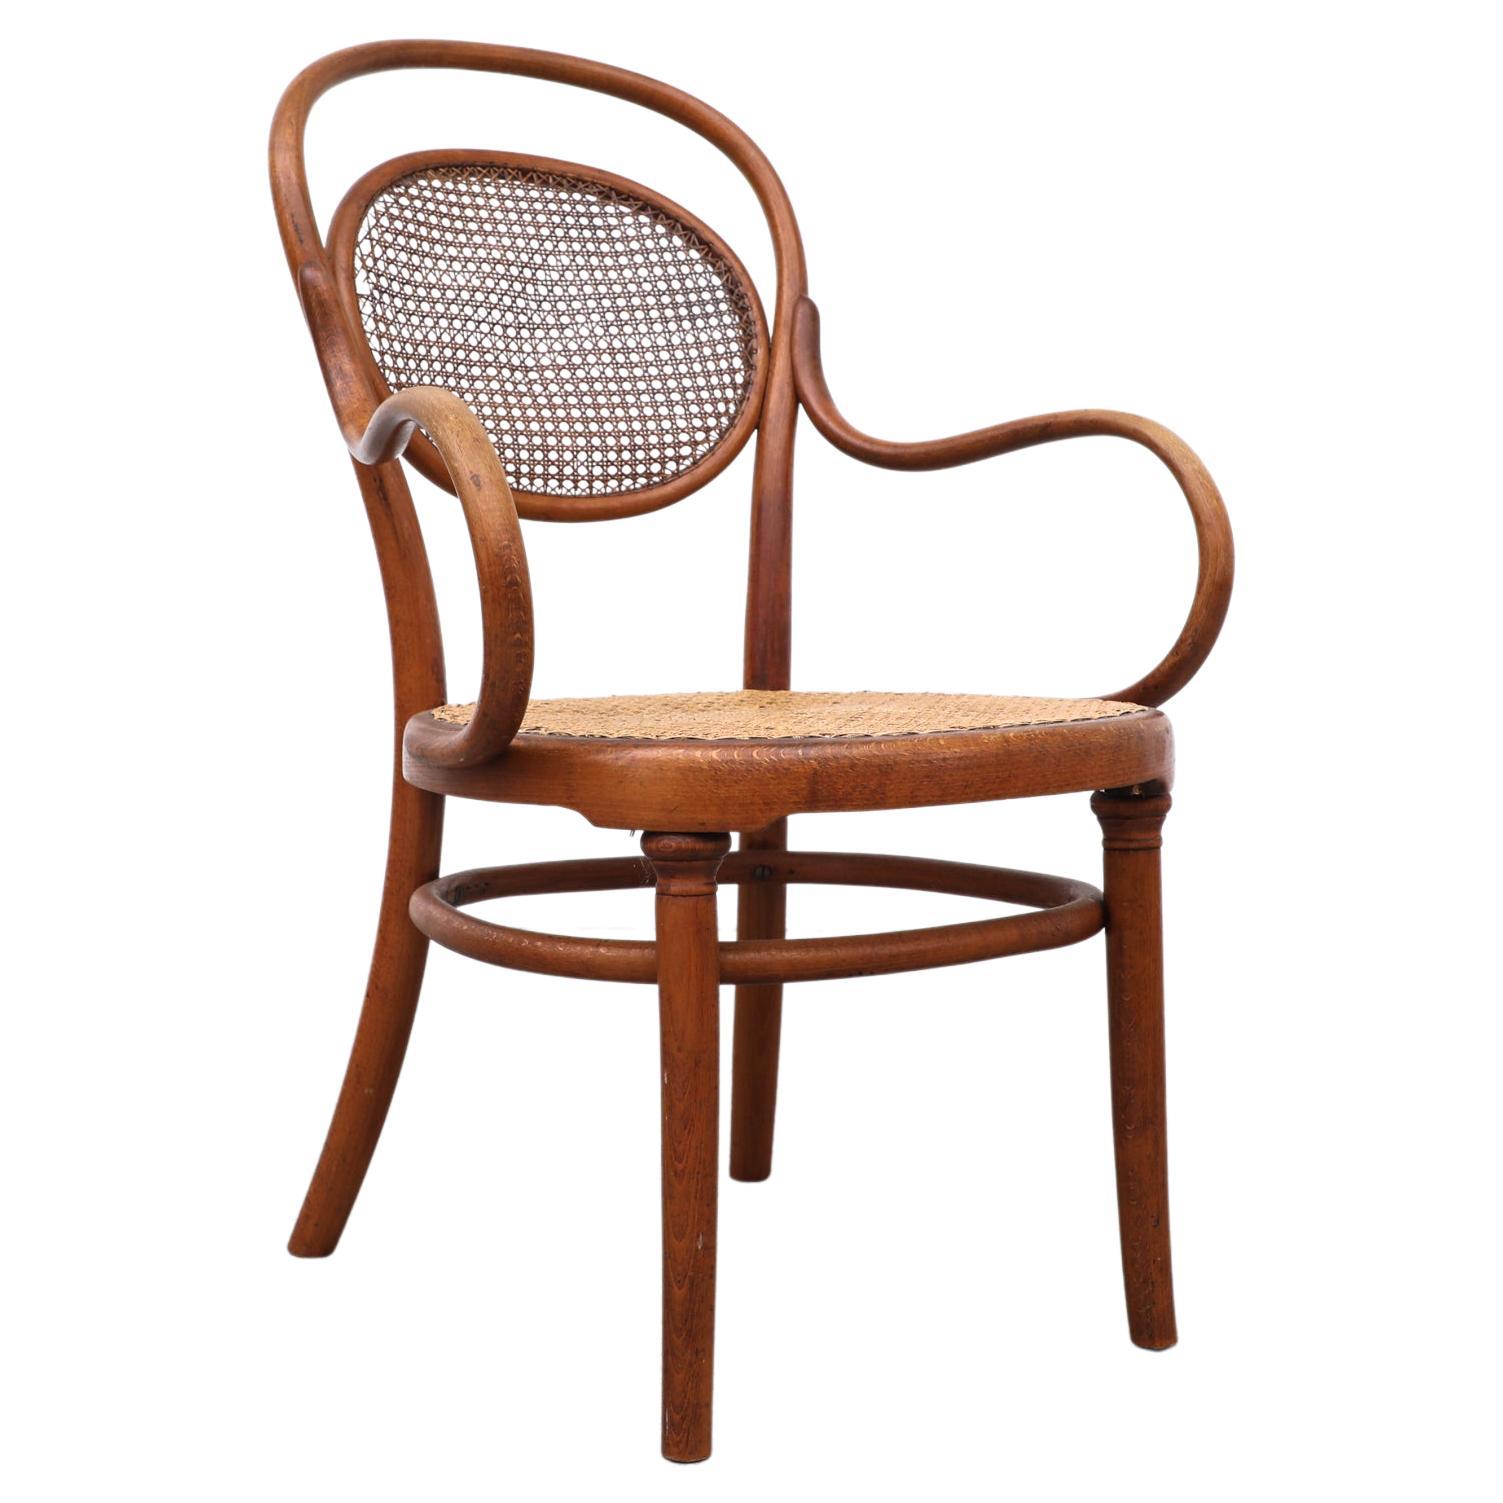 Fauteuil Bistro n° 12 Thonet, 1881-1919